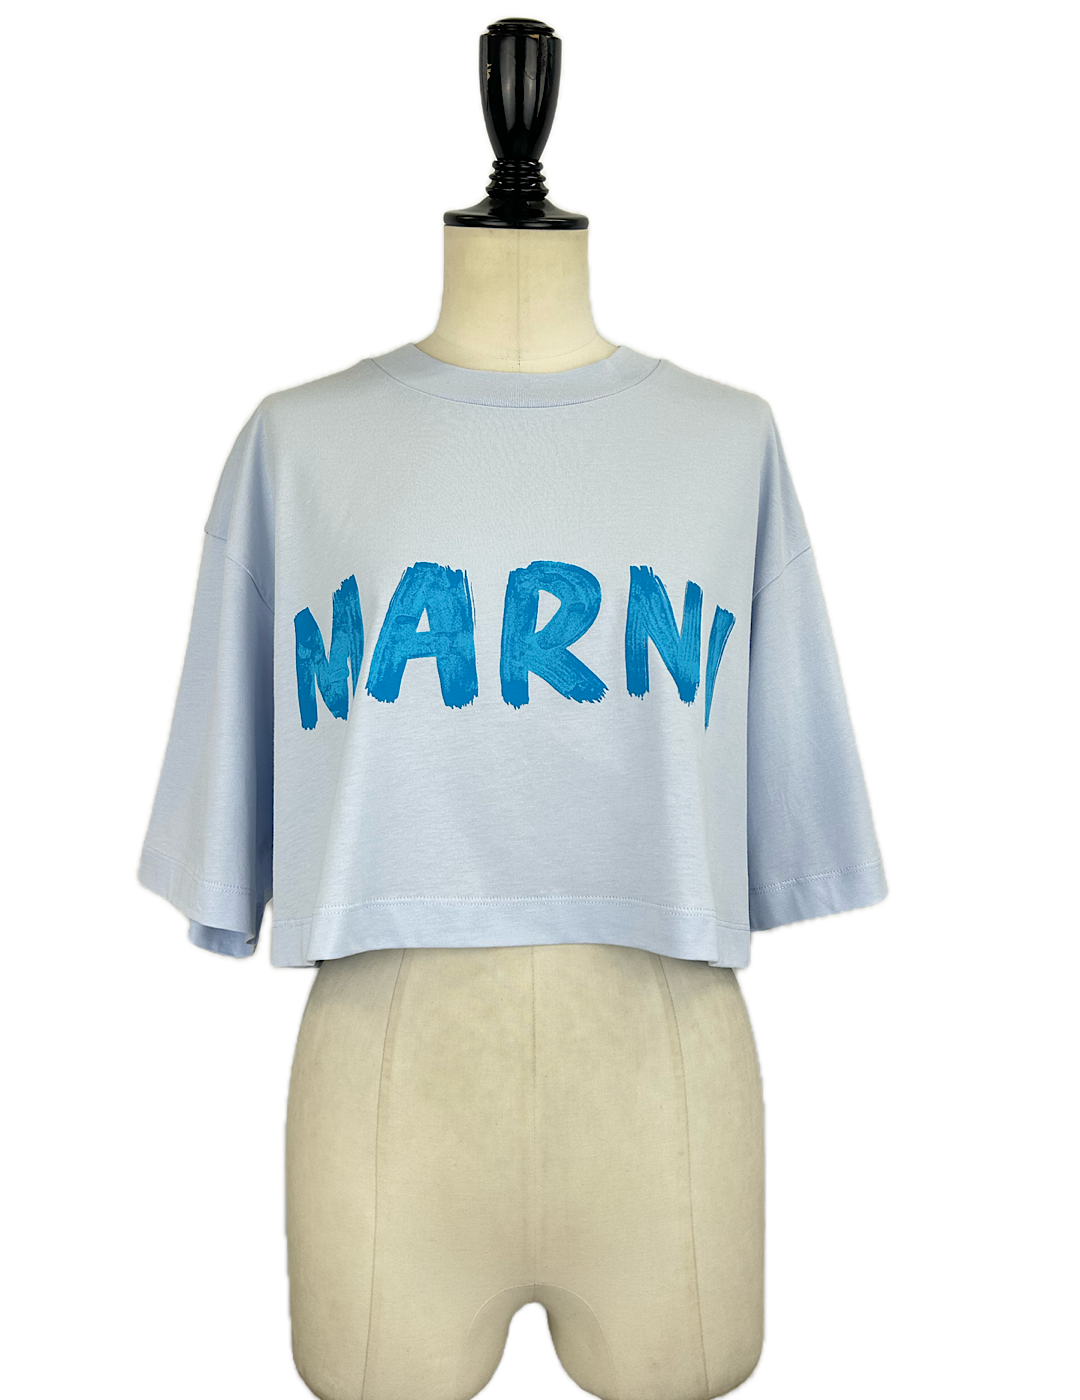 <img class='new_mark_img1' src='https://img.shop-pro.jp/img/new/icons6.gif' style='border:none;display:inline;margin:0px;padding:0px;width:auto;' />MARNI / T-SHIRT